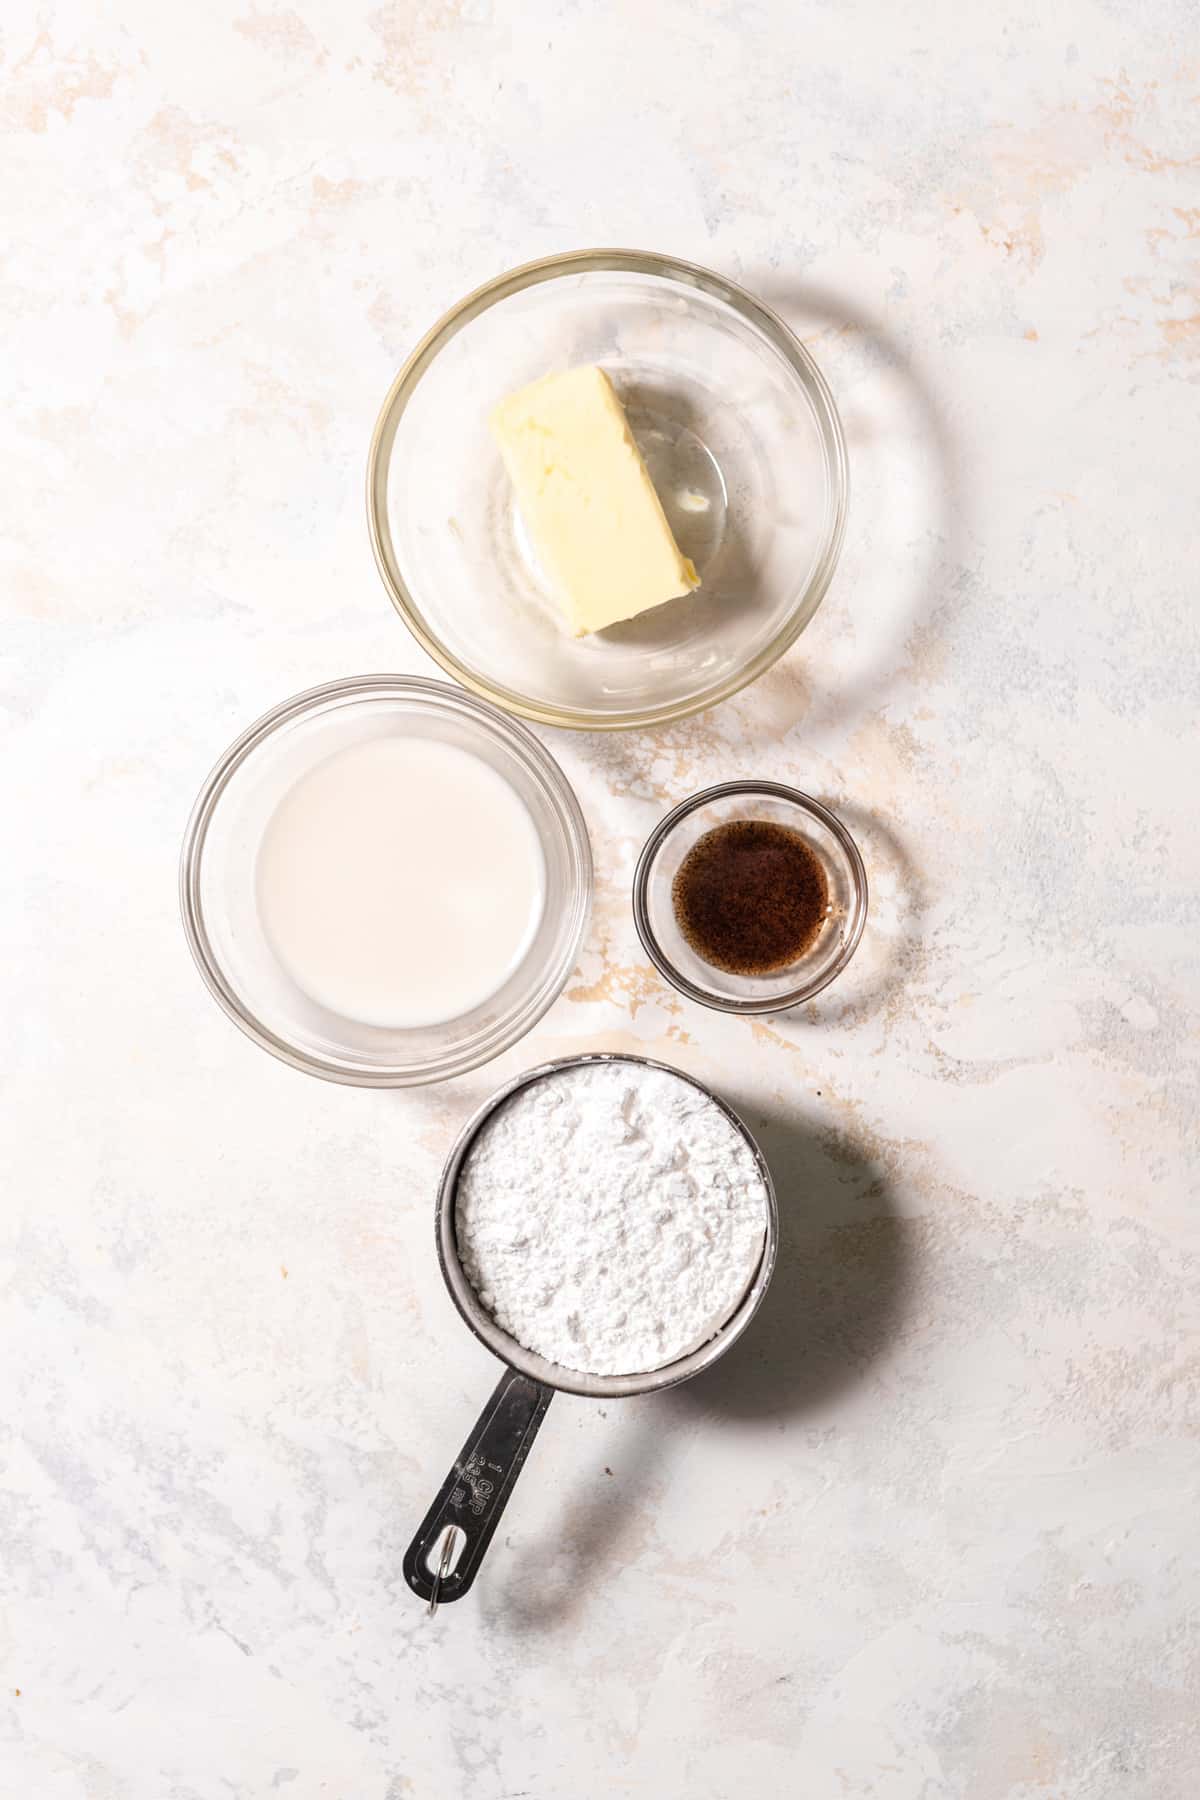 Ingredients to make vanilla buttercream arranged on a surface.